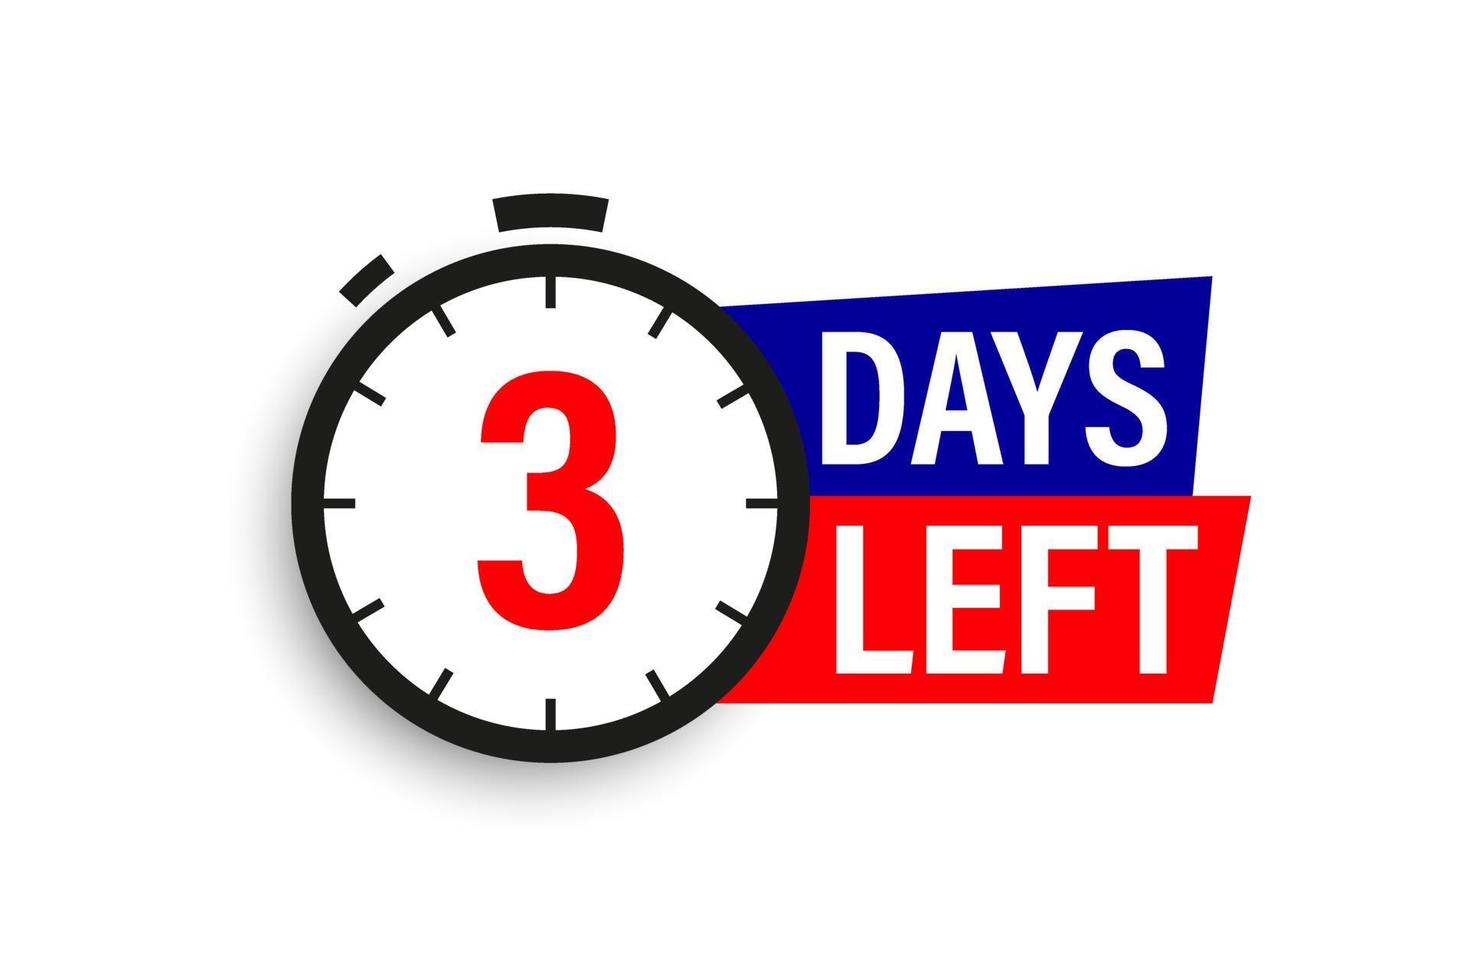 2 days left. Countdown badge. Vector illustration isolated on white background.